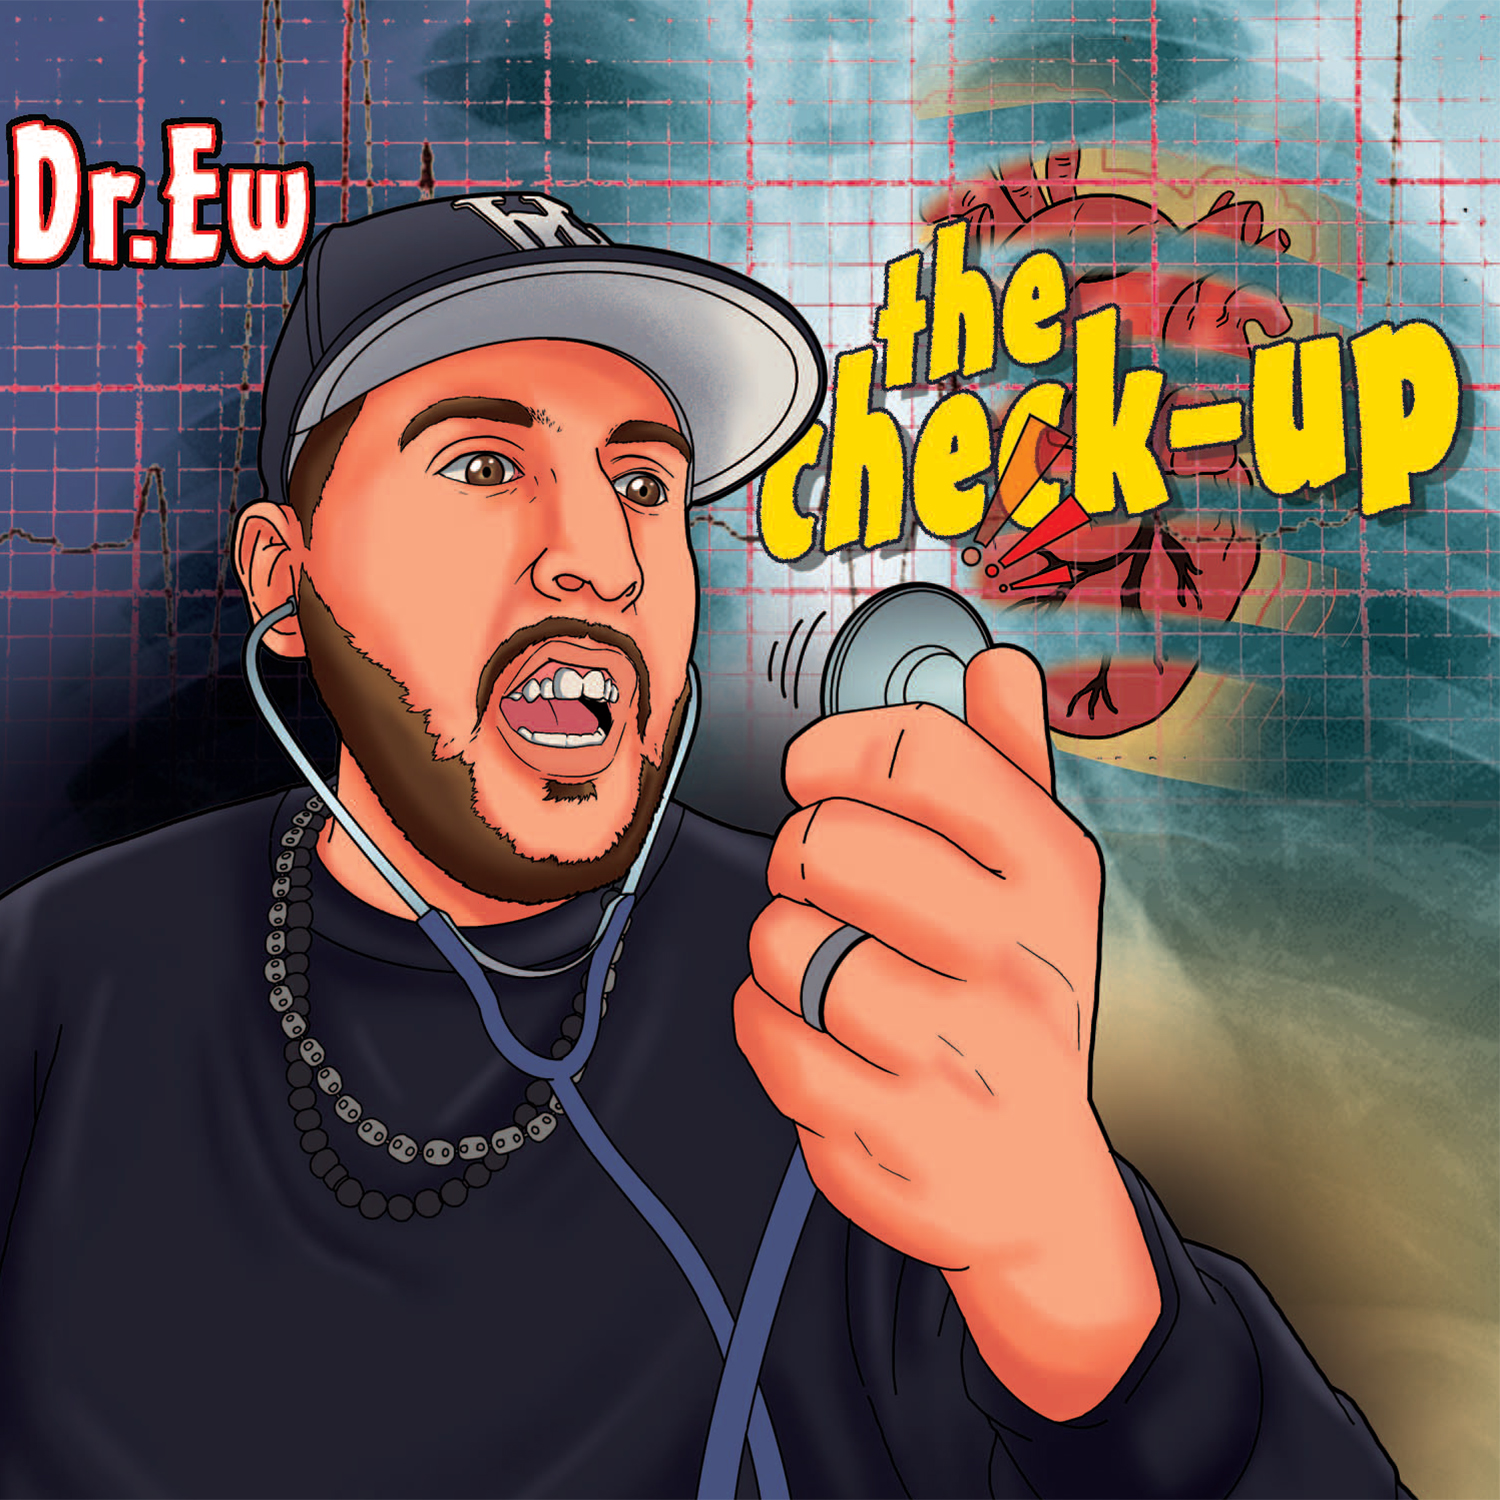 Dr. Ew – The Check-Up